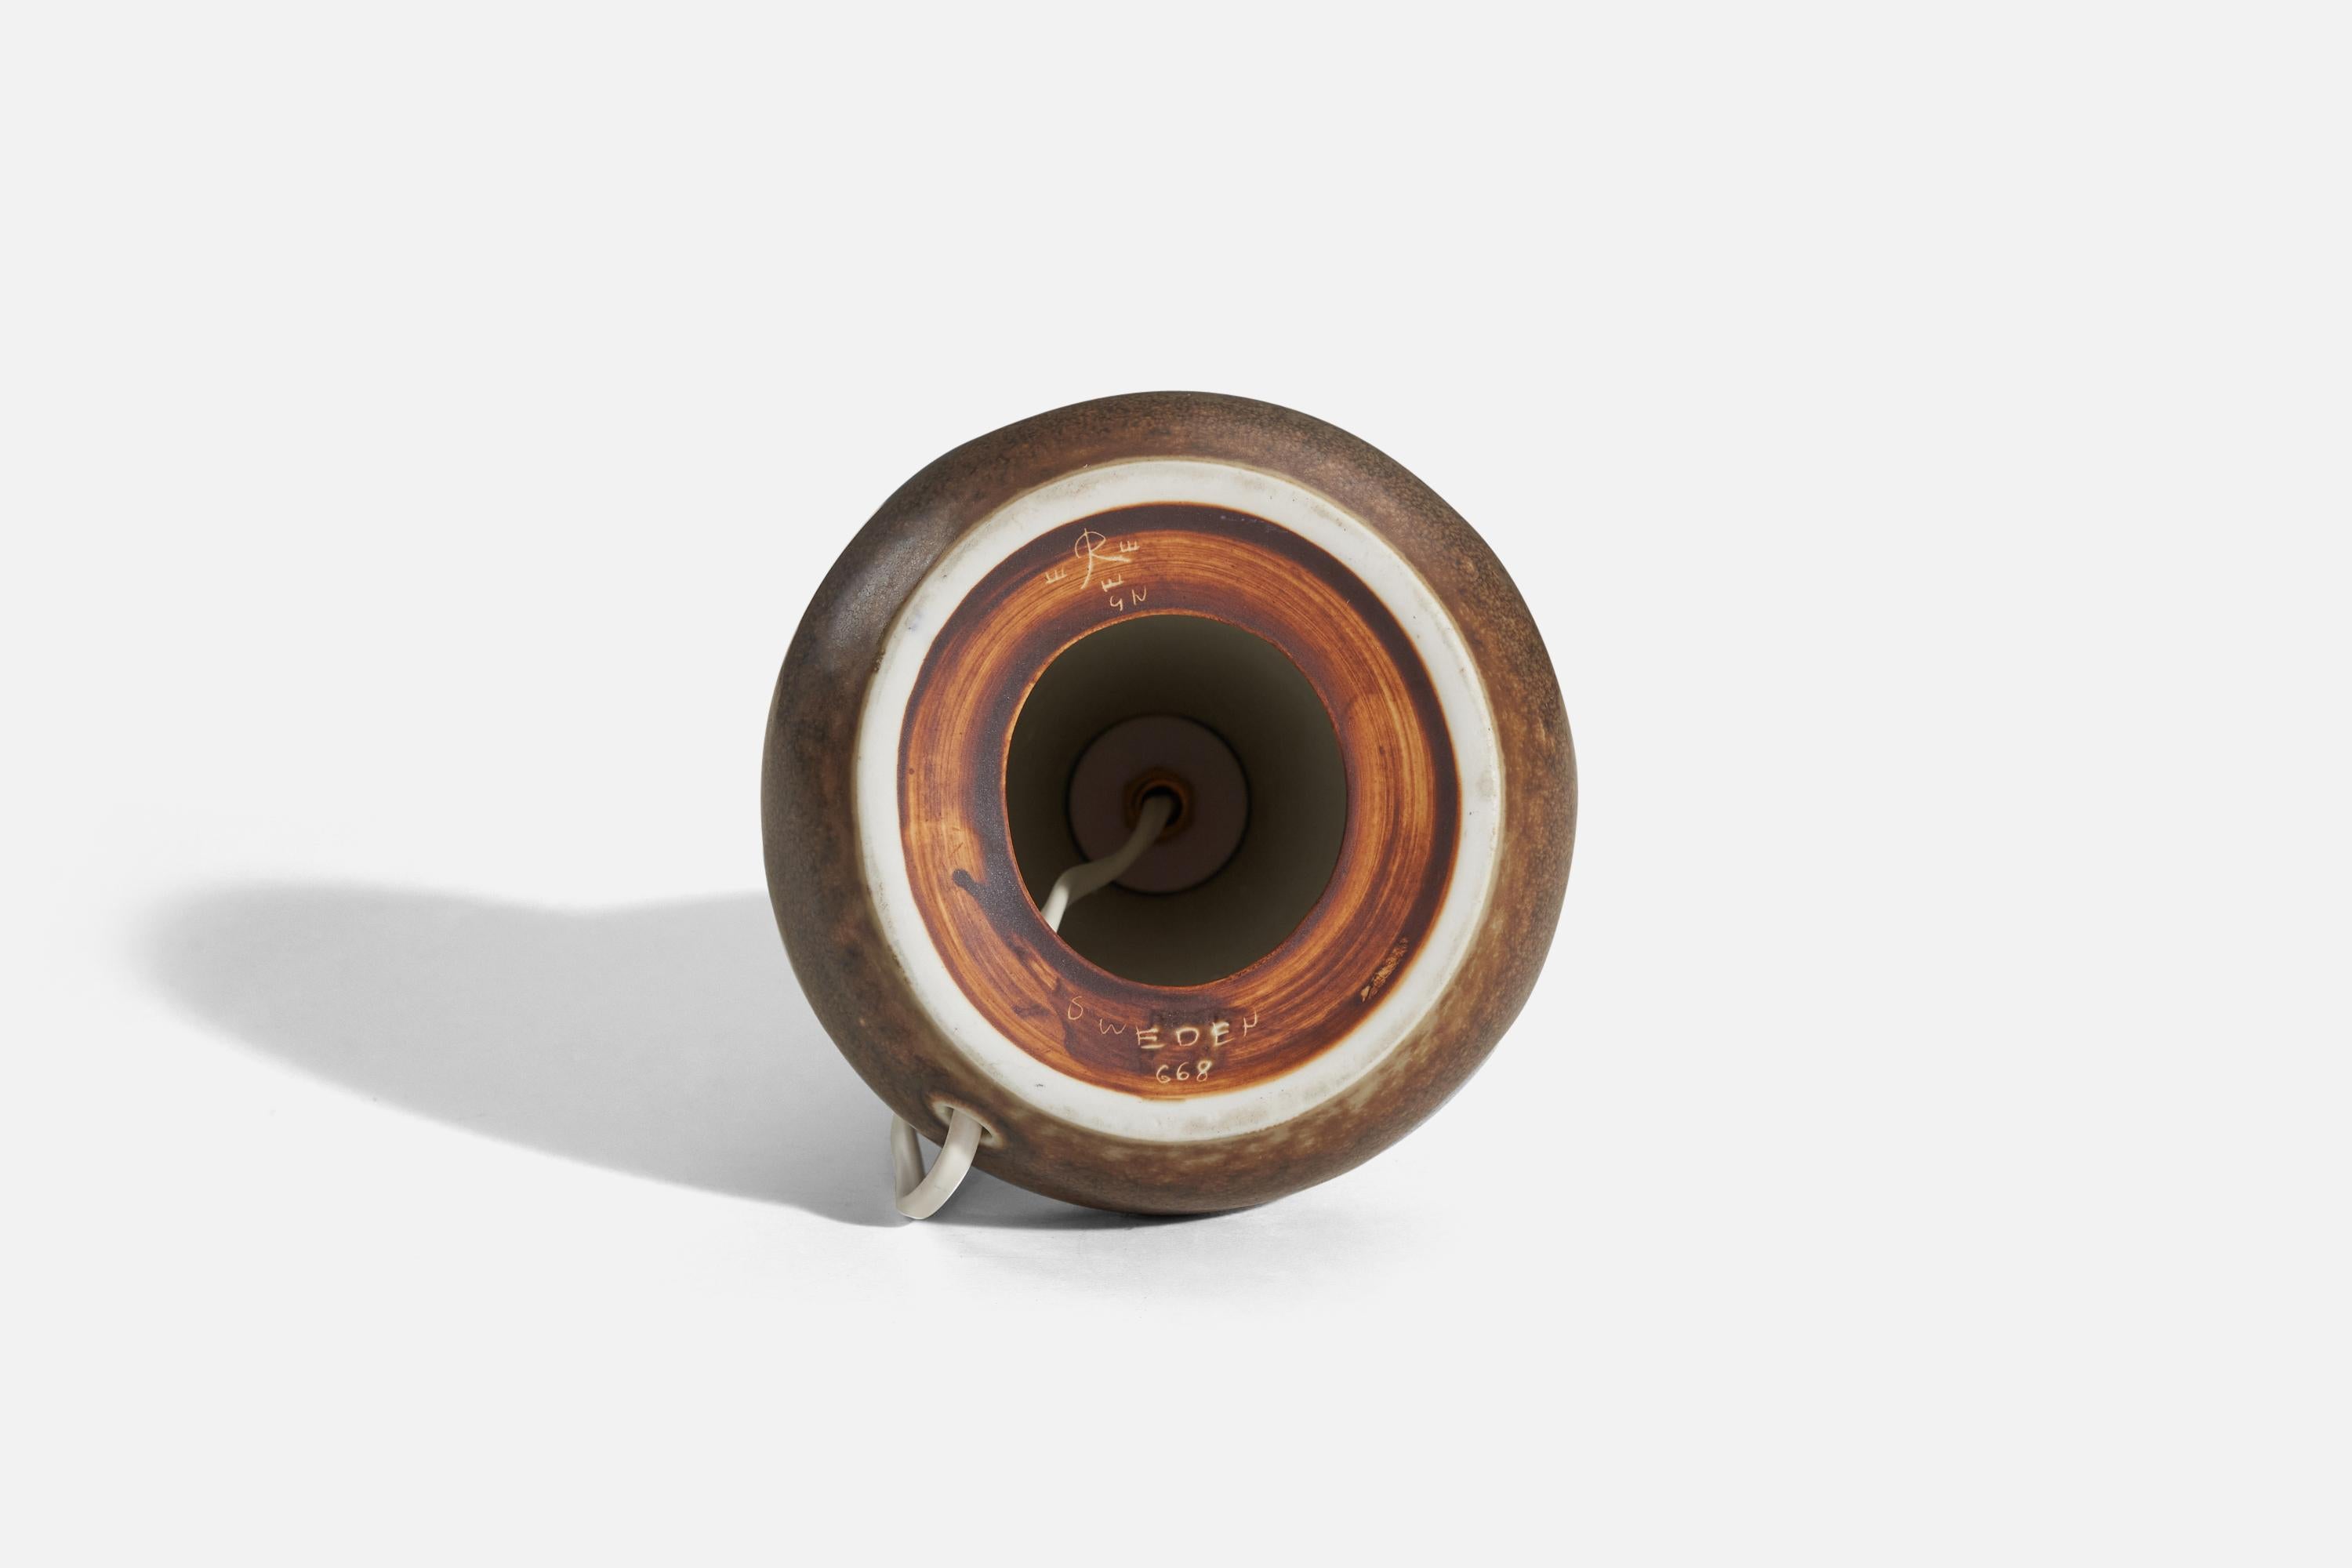 Mid-20th Century Gunnar Nylund, Table Lamp, Brown-Glazed Stoneware, Rörstand, Sweden, 1950s For Sale